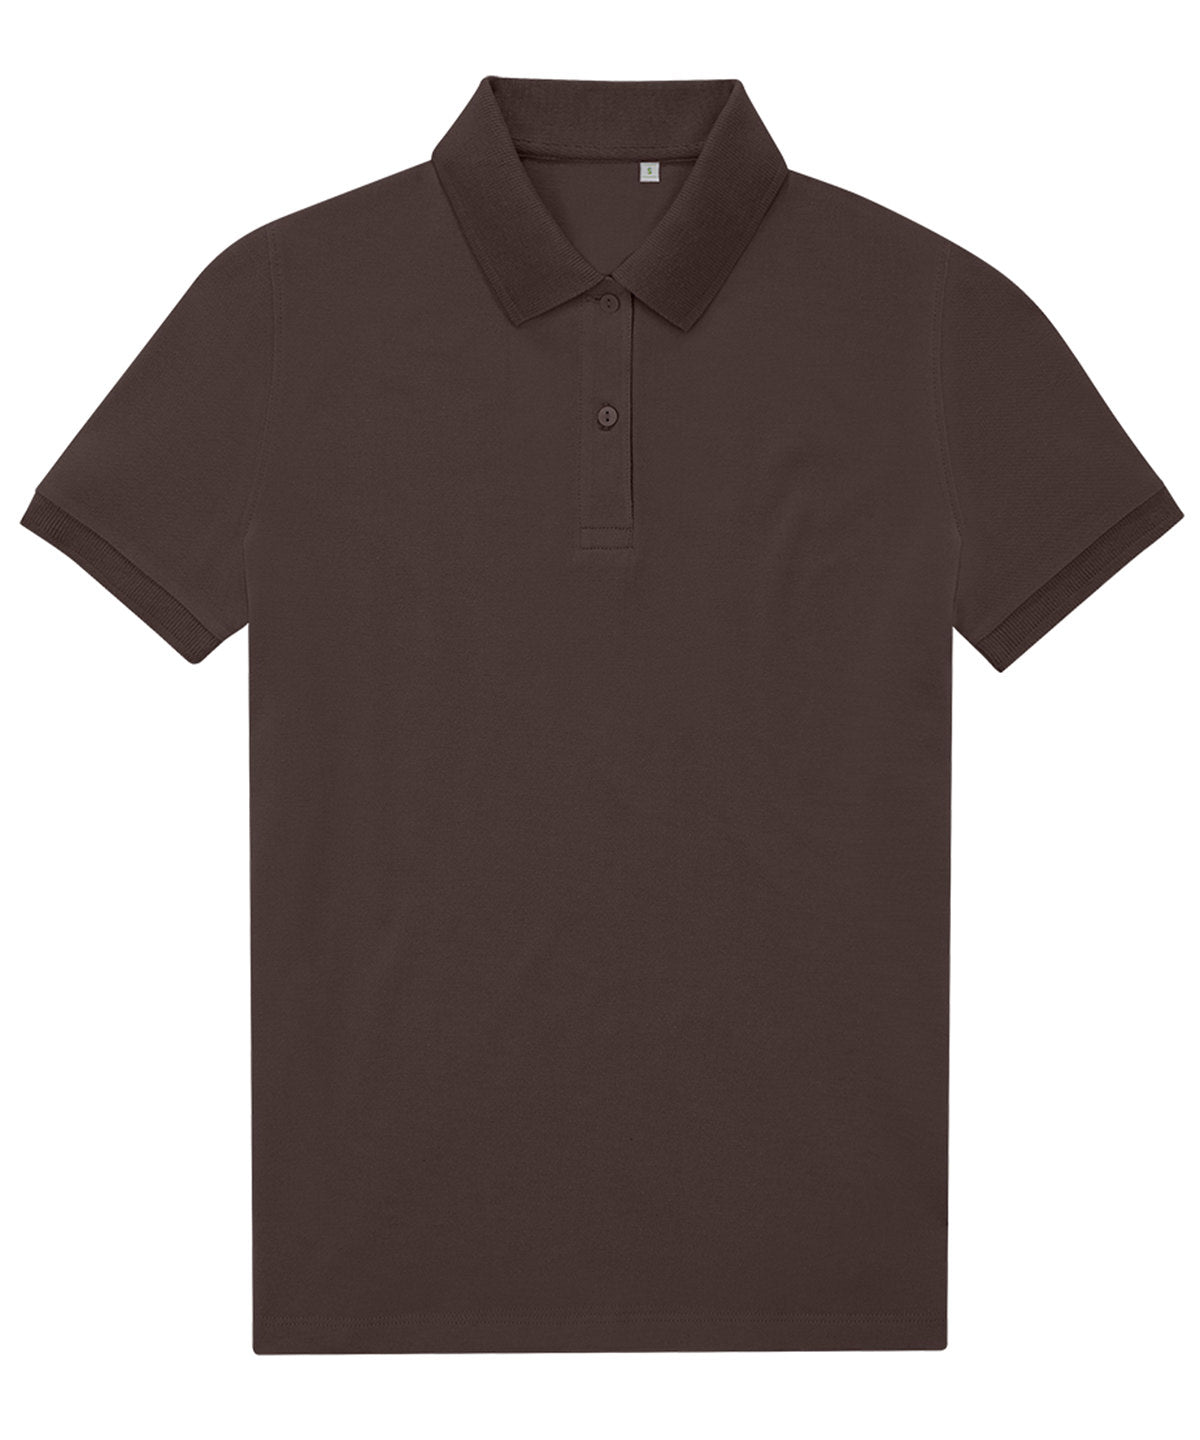 B&C Collection My Eco Polo 65/35 Women Roasted Coffee